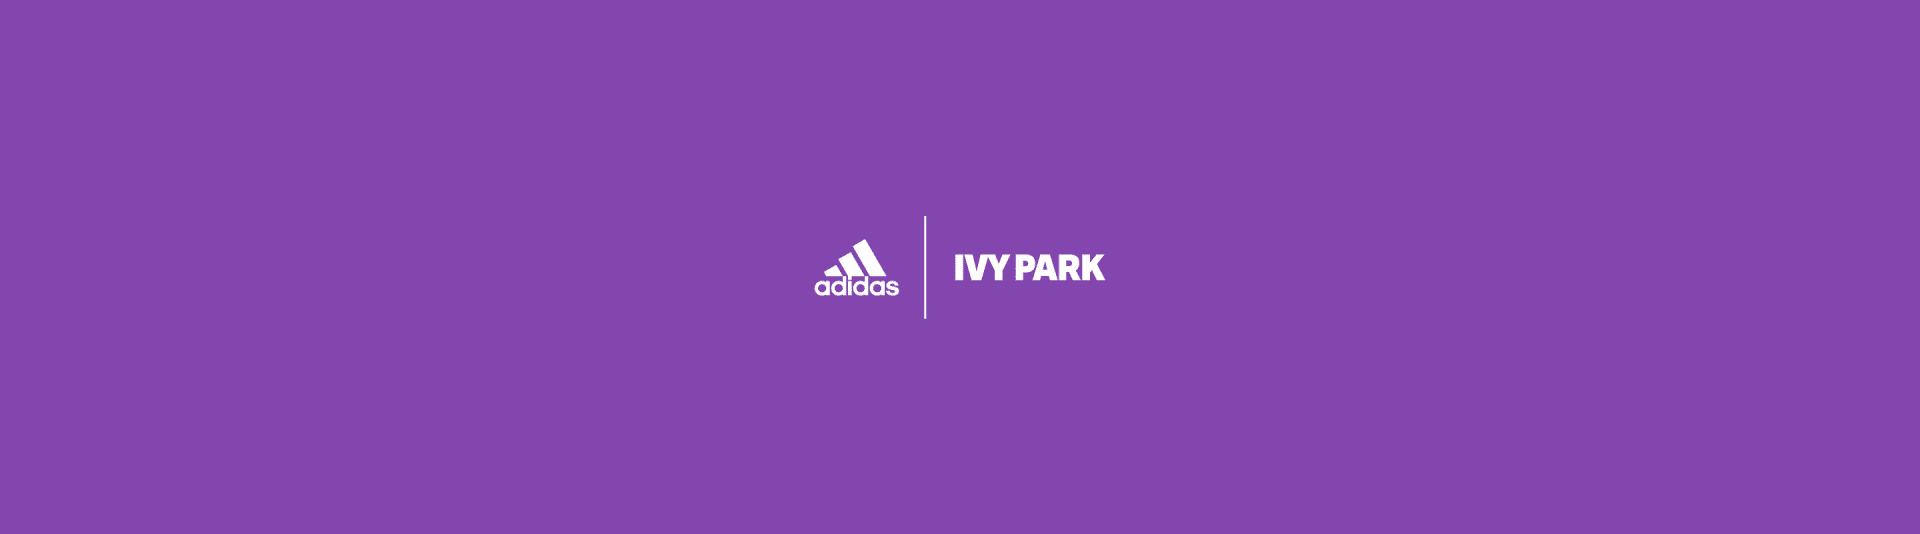 The adidas and IVY PARK logos are dispalyed against a purple background along with the words PARK TRAIL and numbers 2.9.2023.